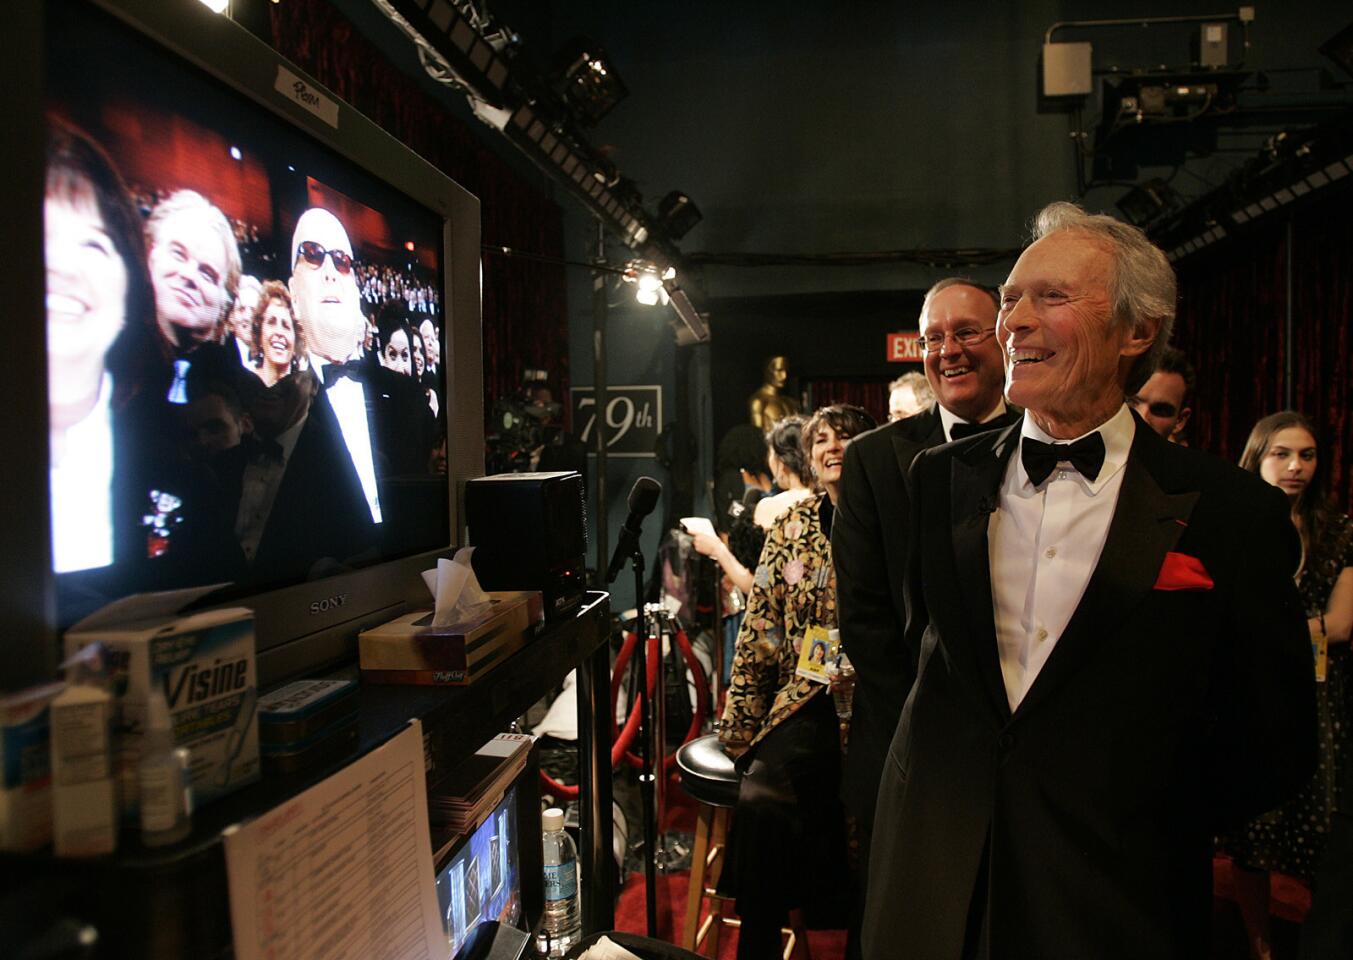 Moments backstage at the Oscars